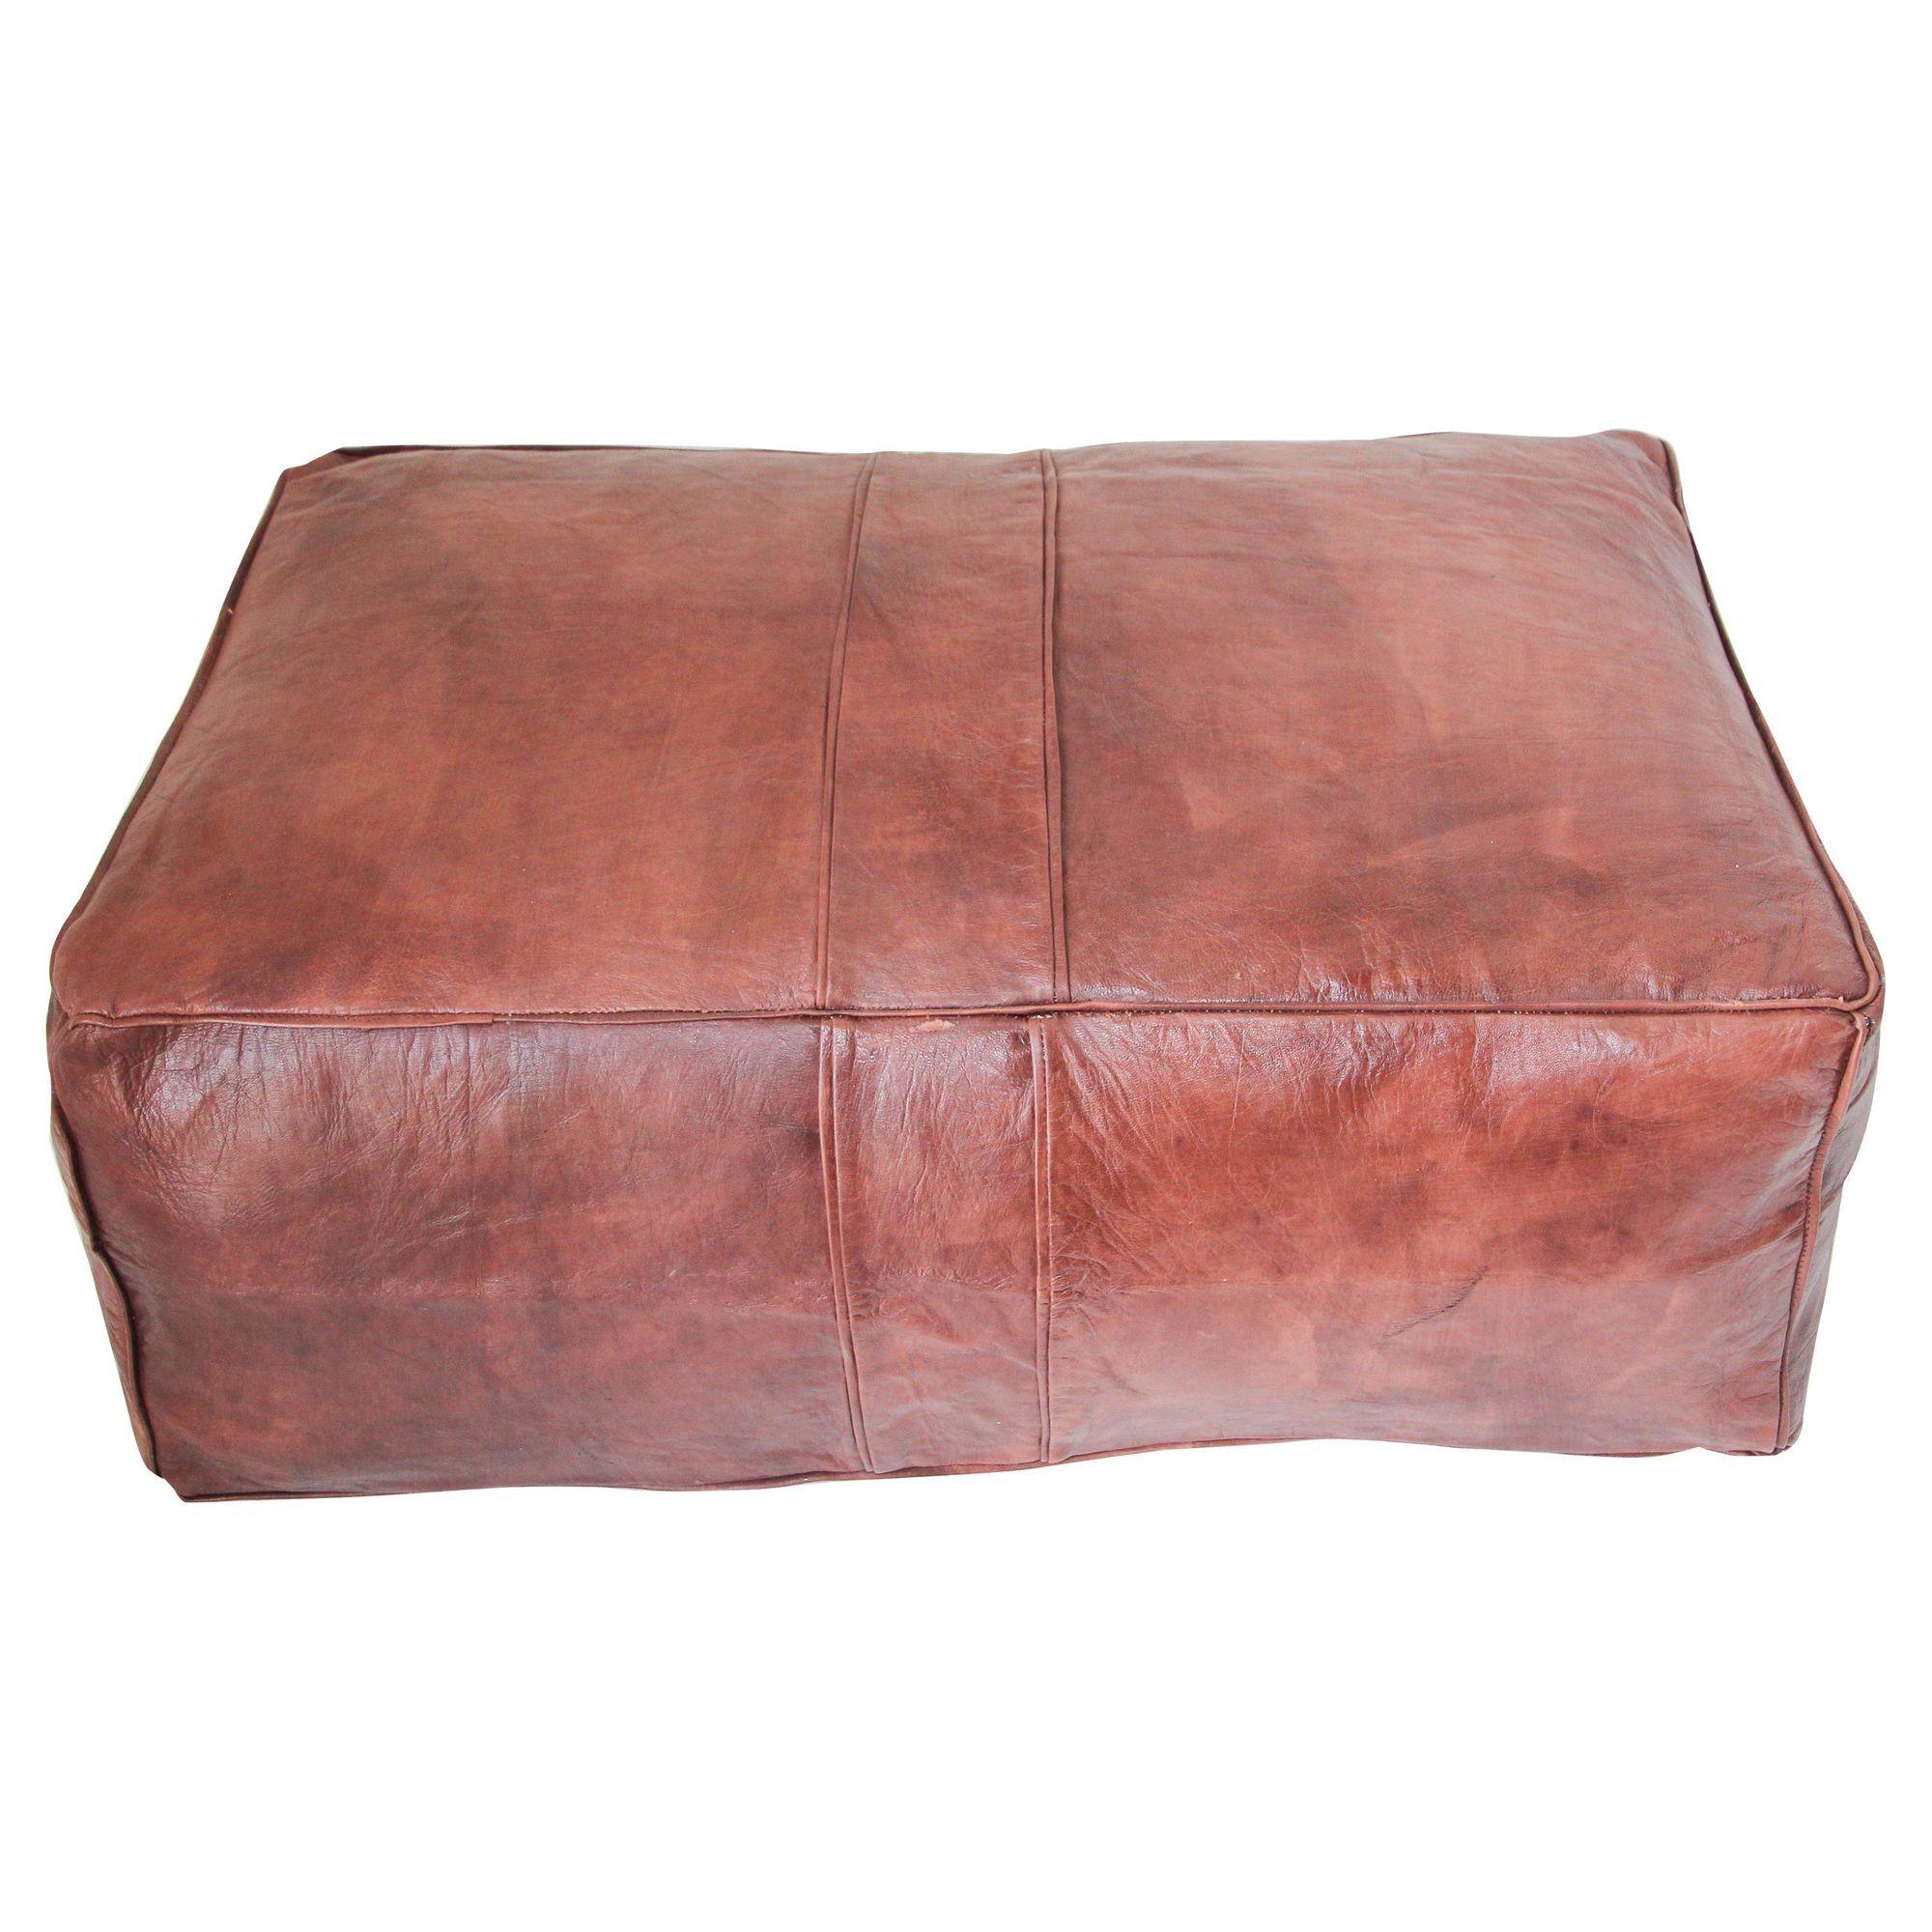 Large Moroccan Brown Leather Rectangular Pouf Ottoman For Sale 3